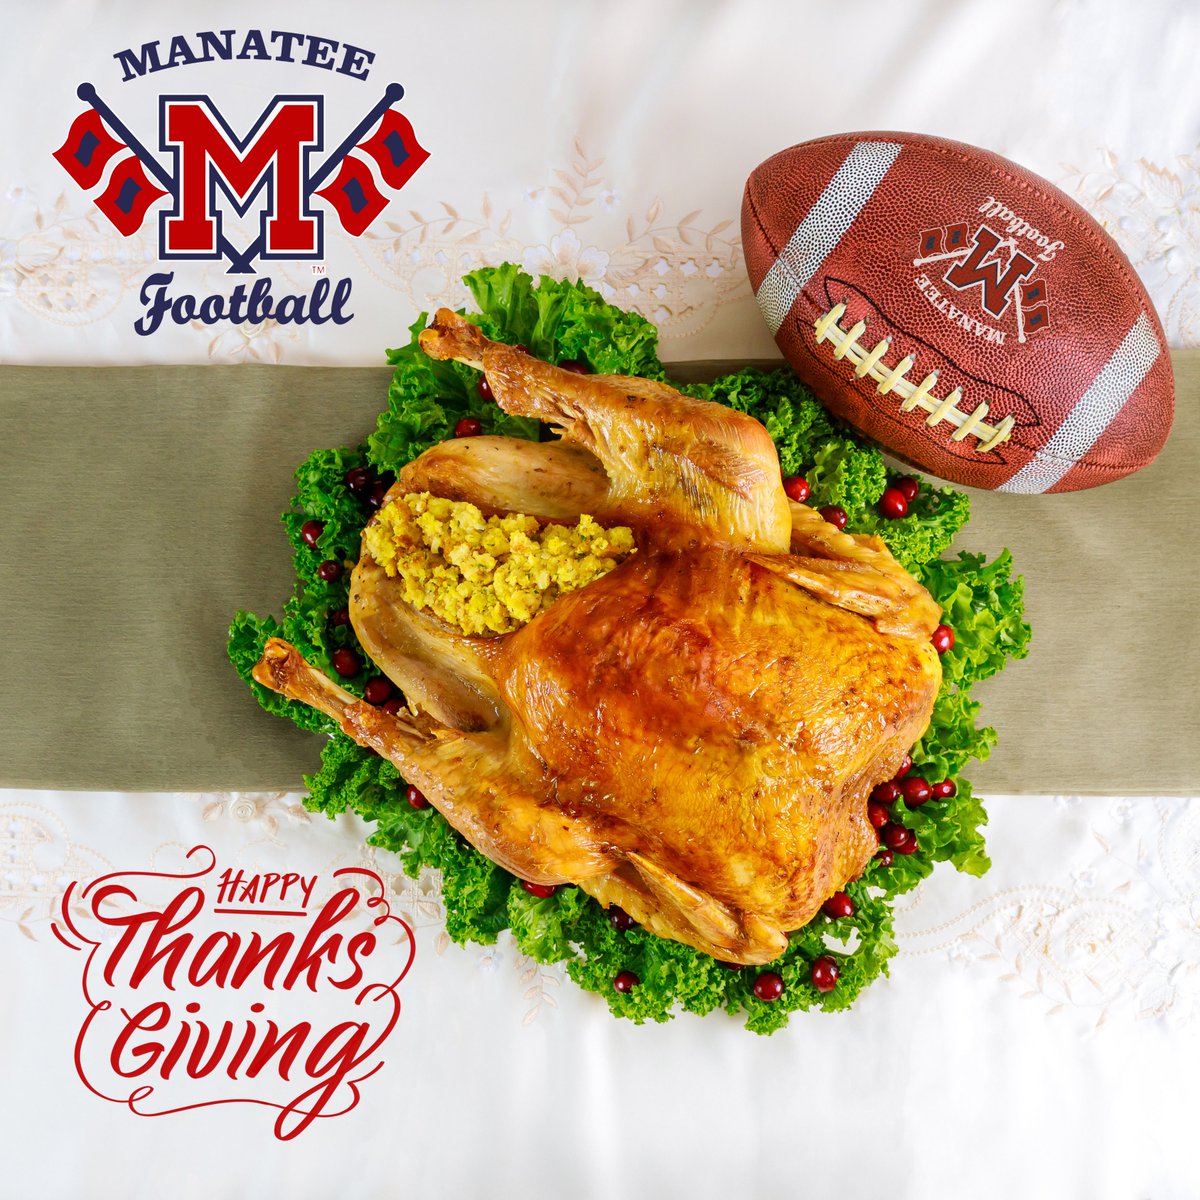 🏈🍂 Happy Thanksgiving from Manatee Football! 🦃🌟 In this season of gratitude, we're thankful for our incredible team, dedicated coaches, and passionate fans. Wishing you all a day full of joy, family, and football.